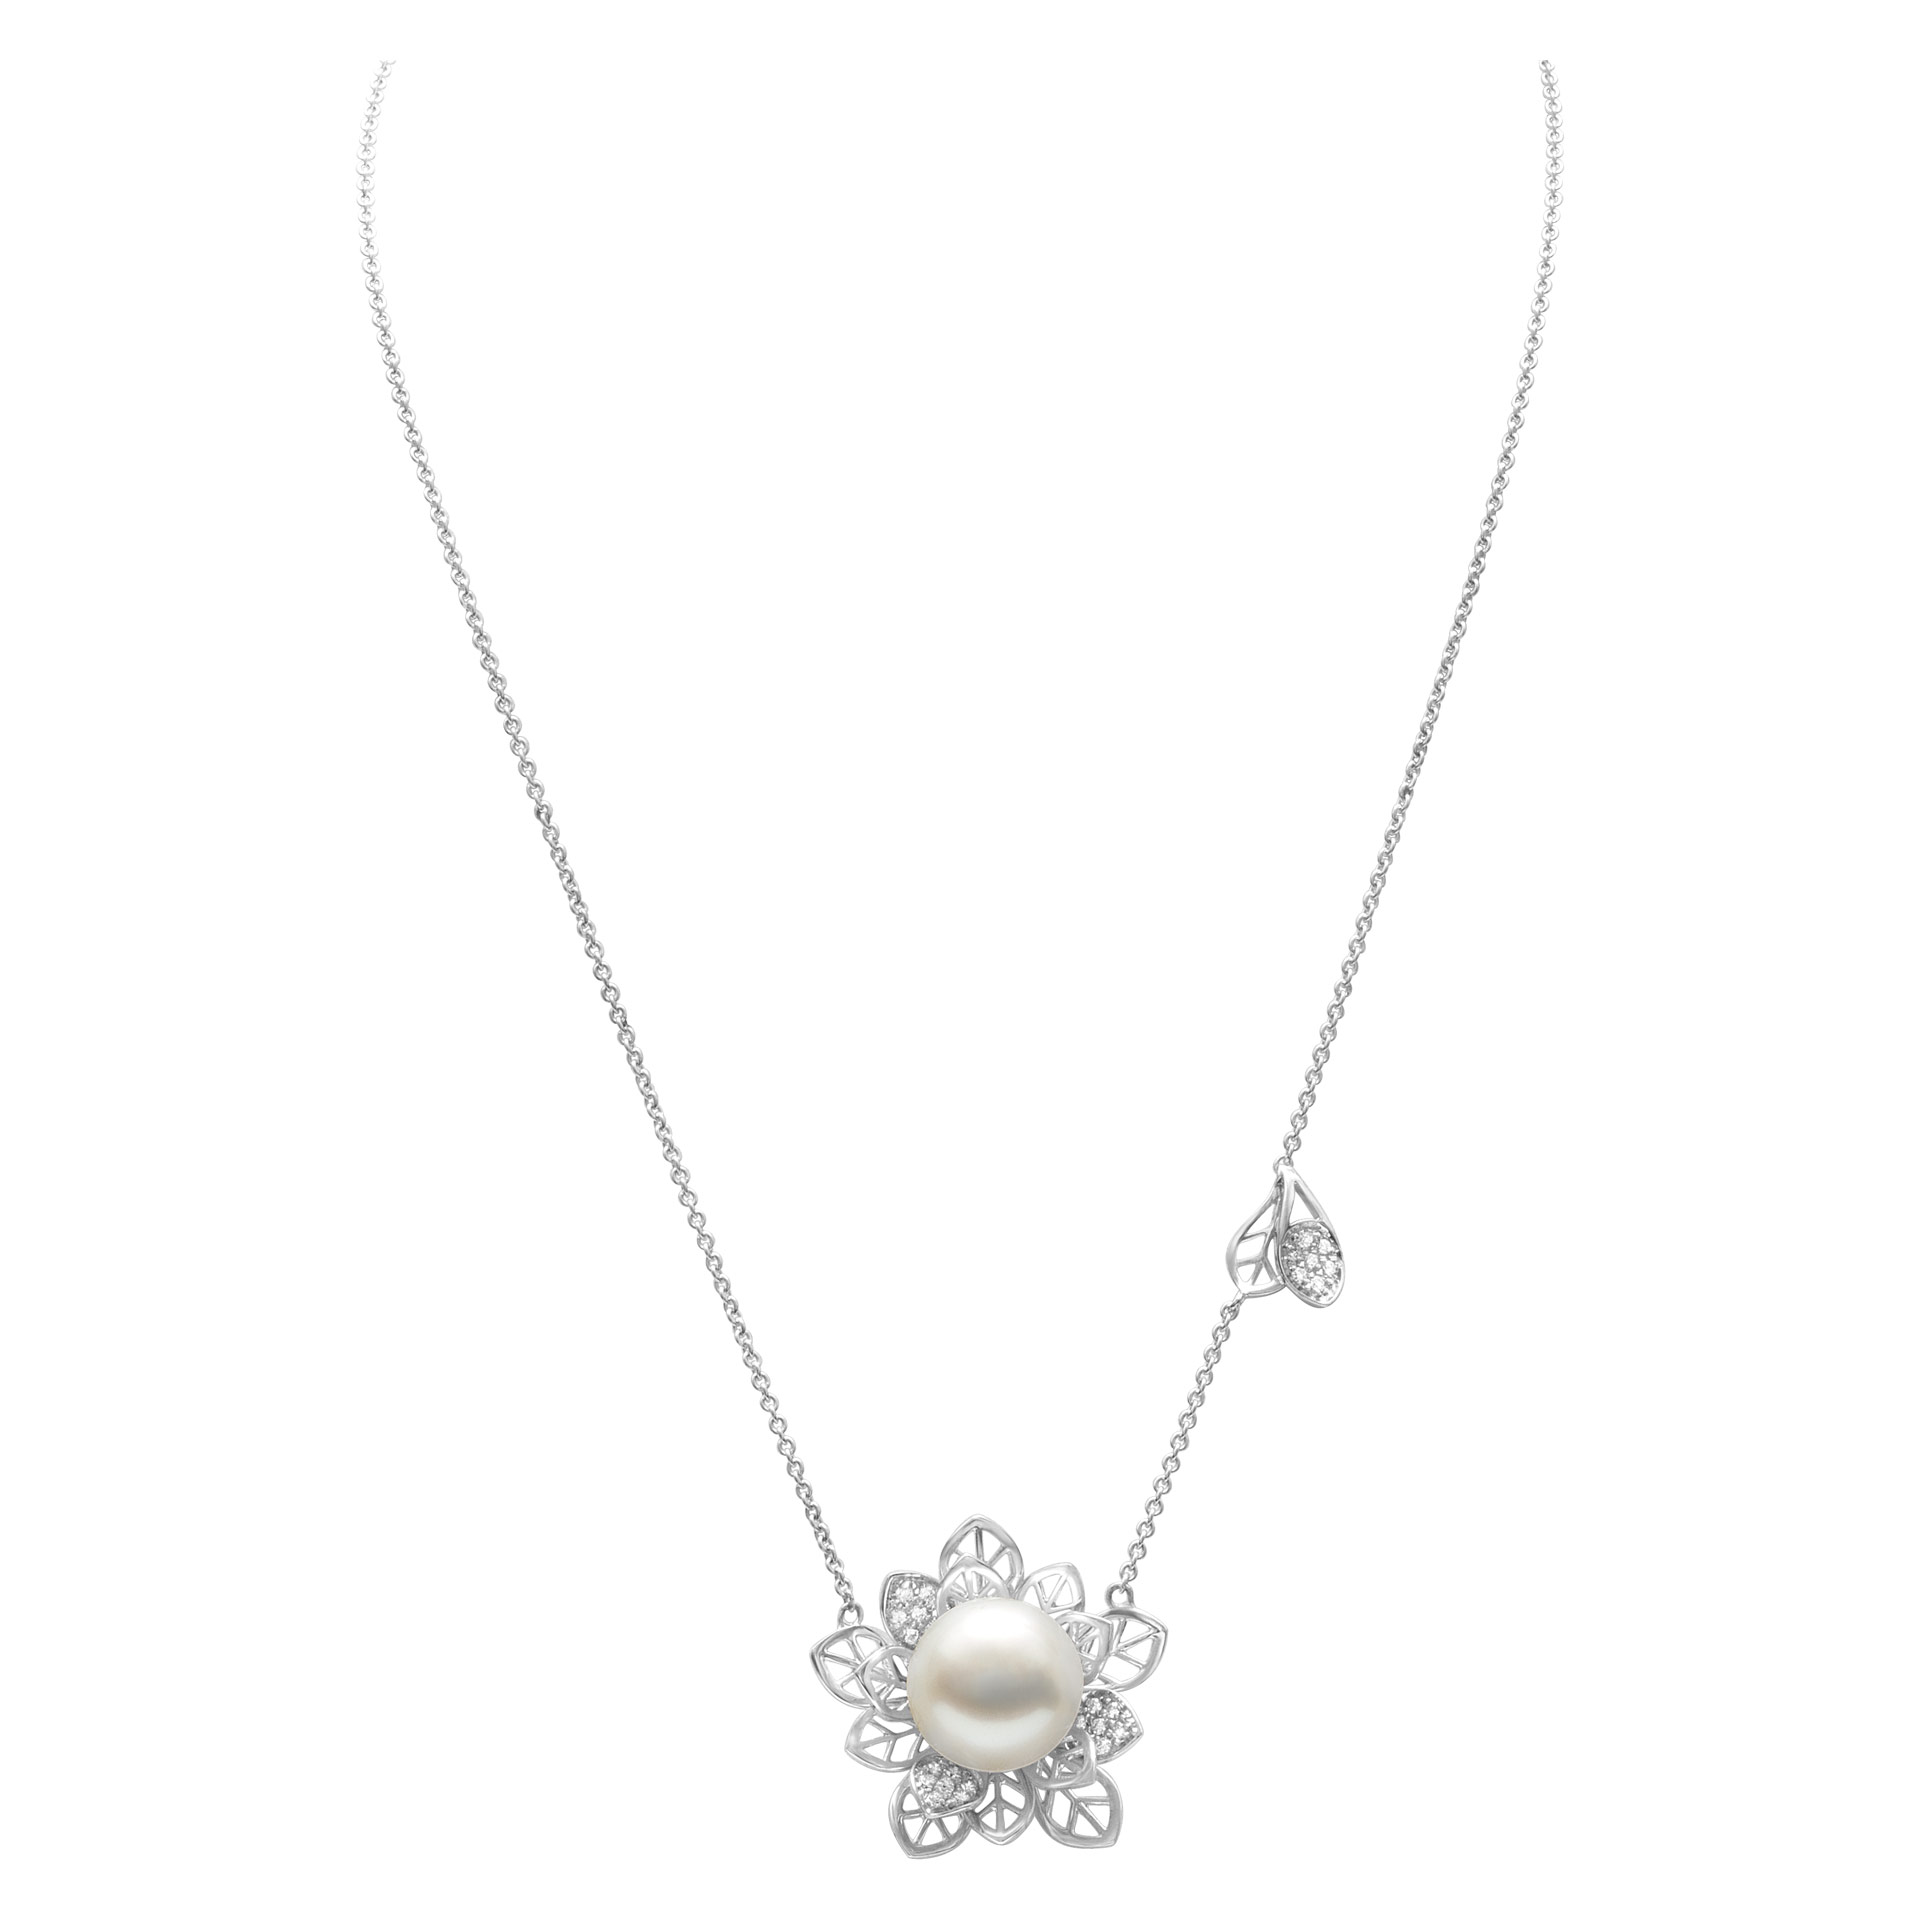 Flower style 12.3mm South Sea Pearl neacklace with diamond accents image 2